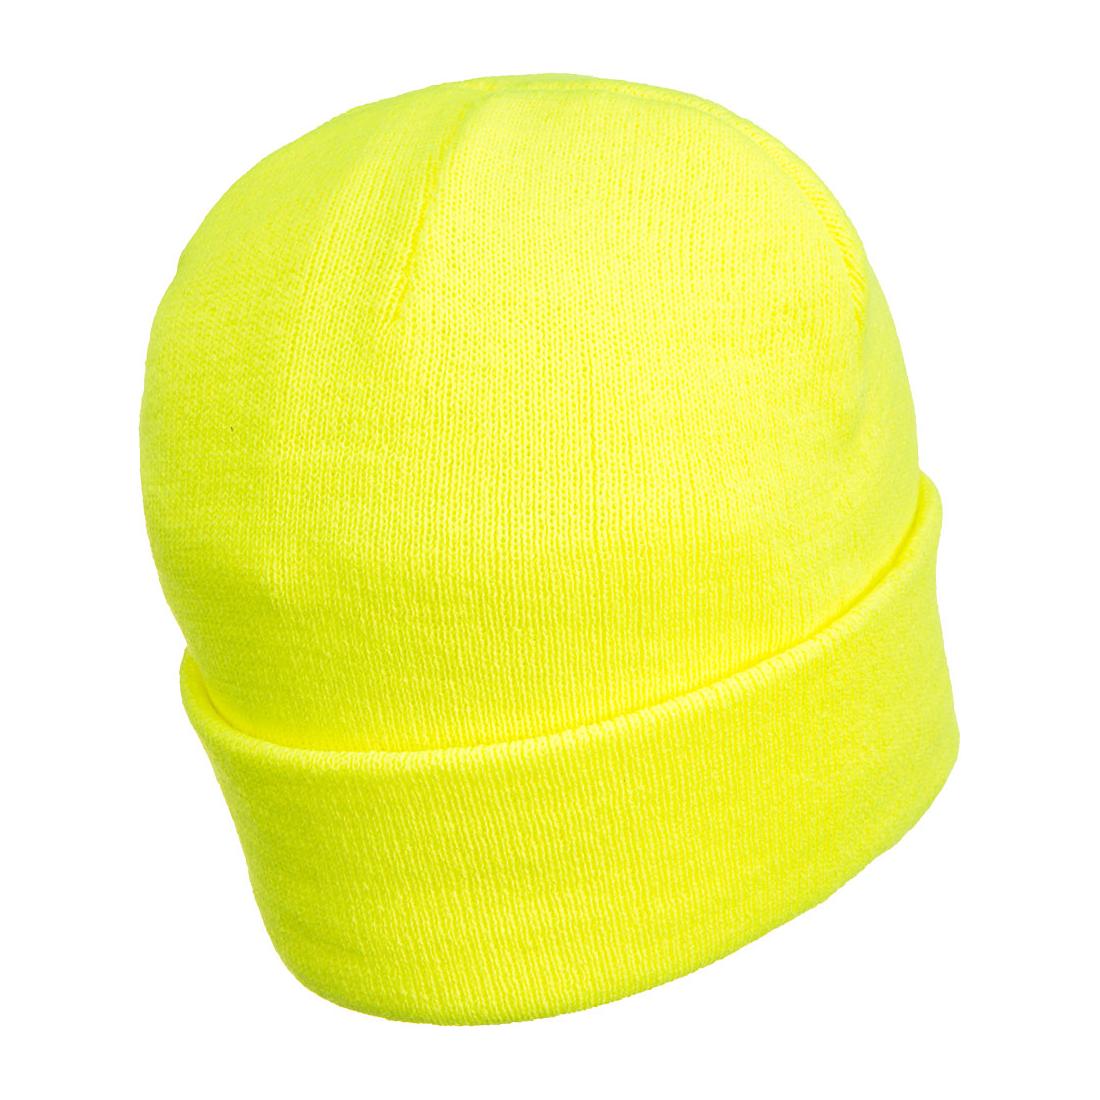 Portwest Beanie Led Head Light USB Rechargeable Yellow